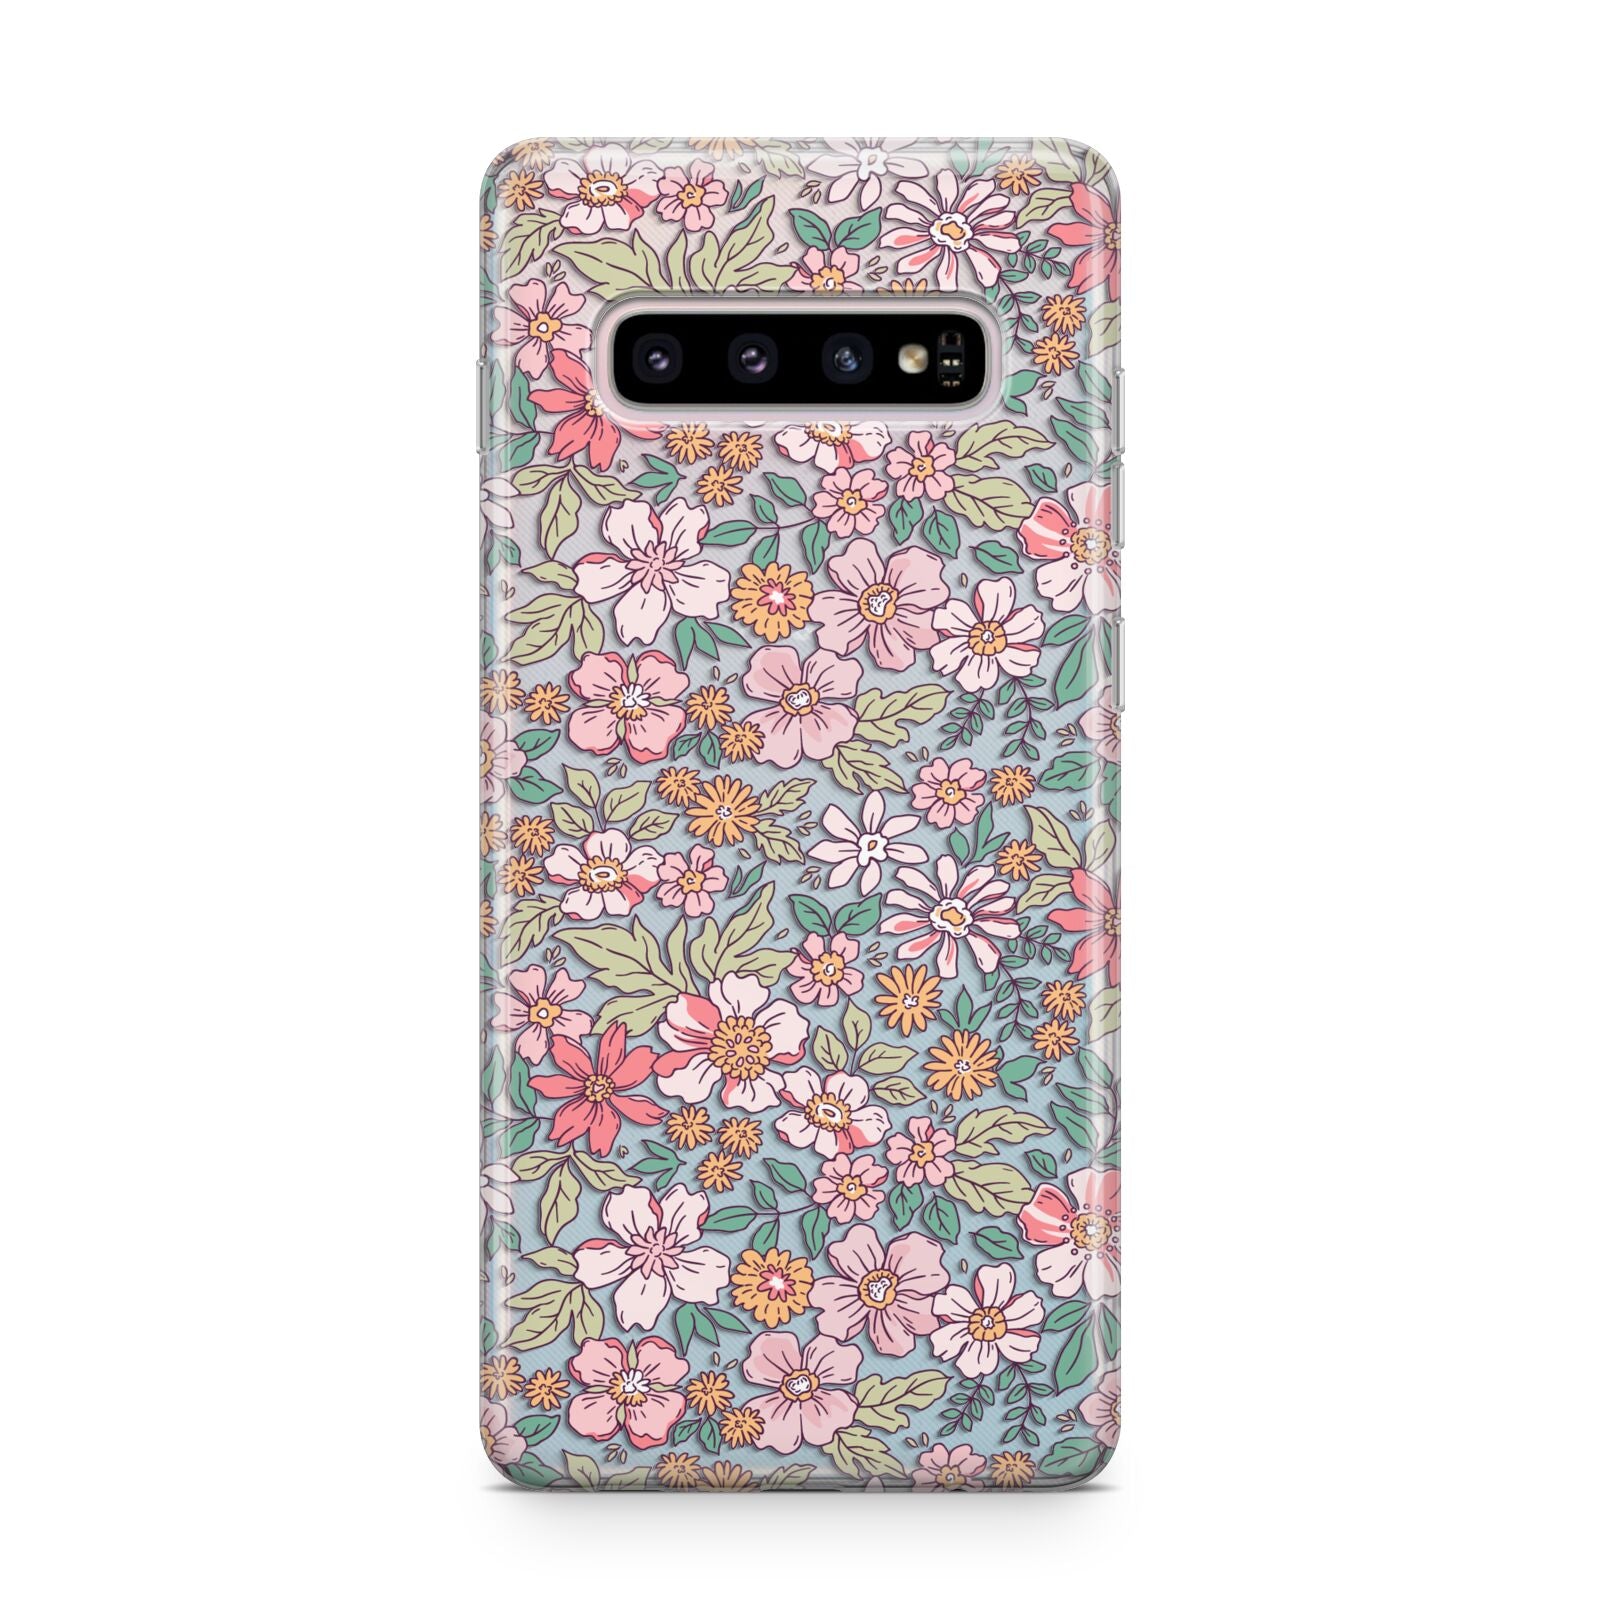 Small Floral Pattern Samsung Galaxy S10 Plus Case